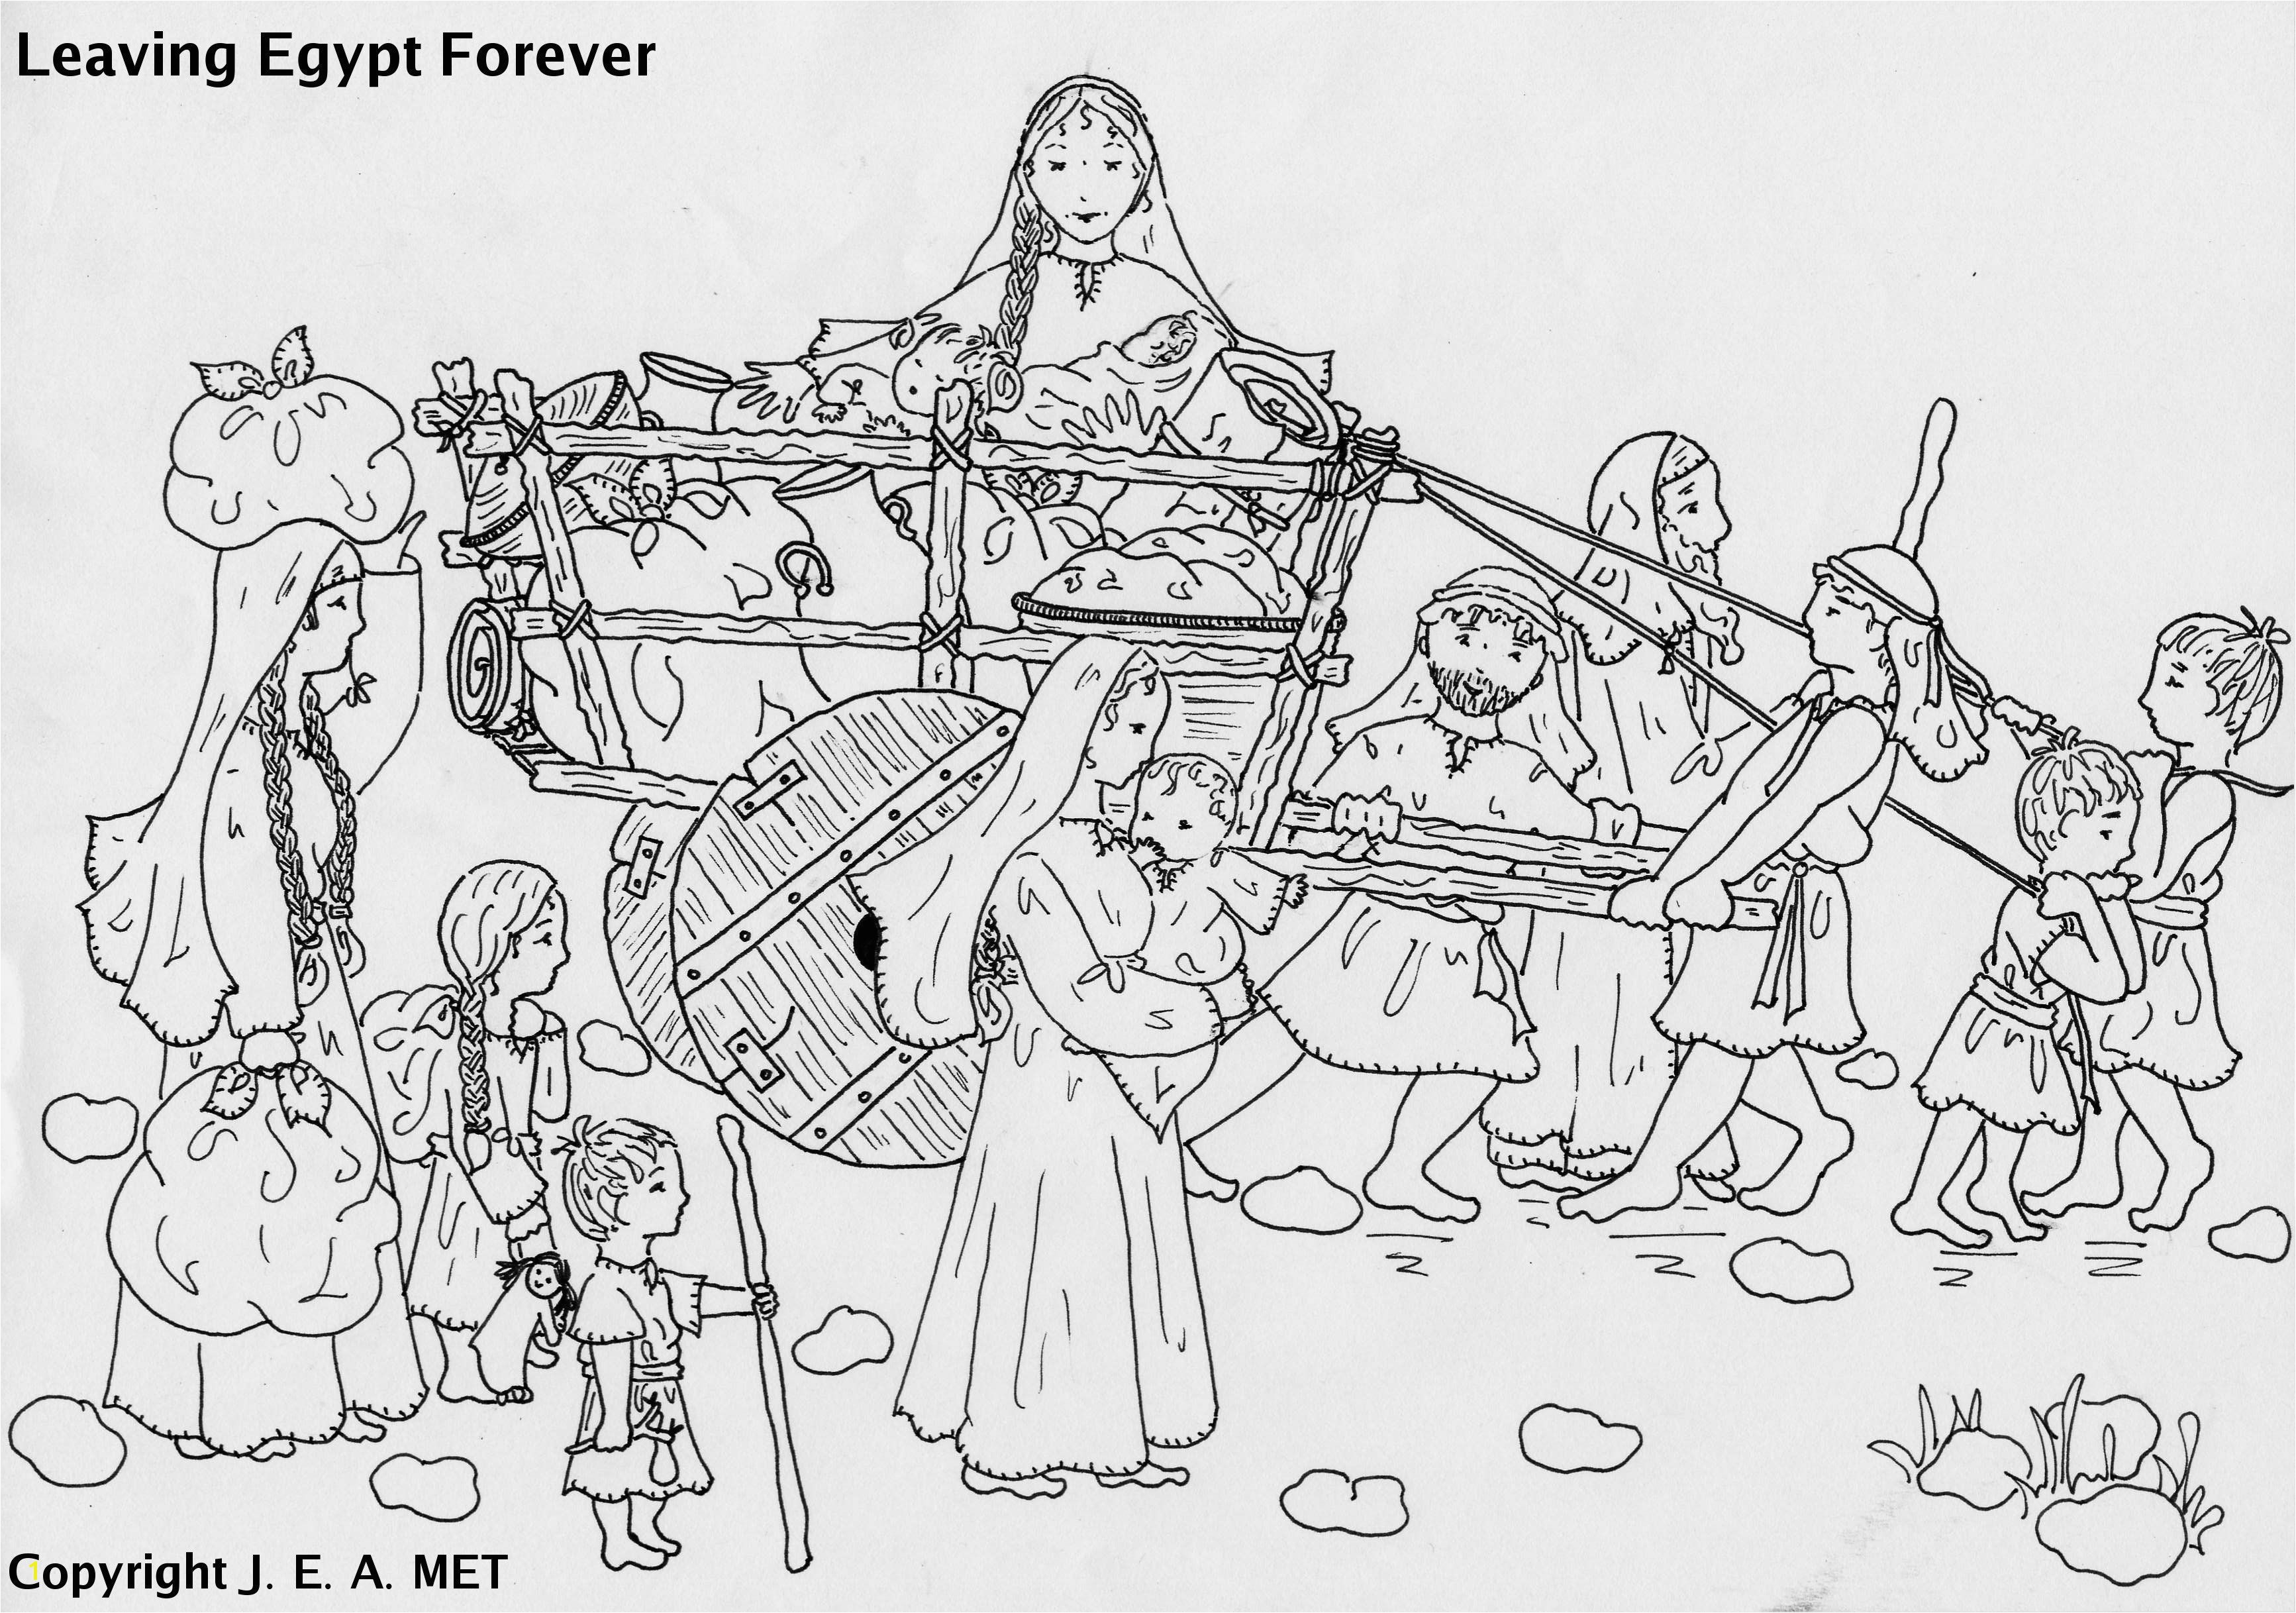 Egyptian Coloring Pages E Coloring Pages Unique the Bible israelites Leaving Egypt Coloring